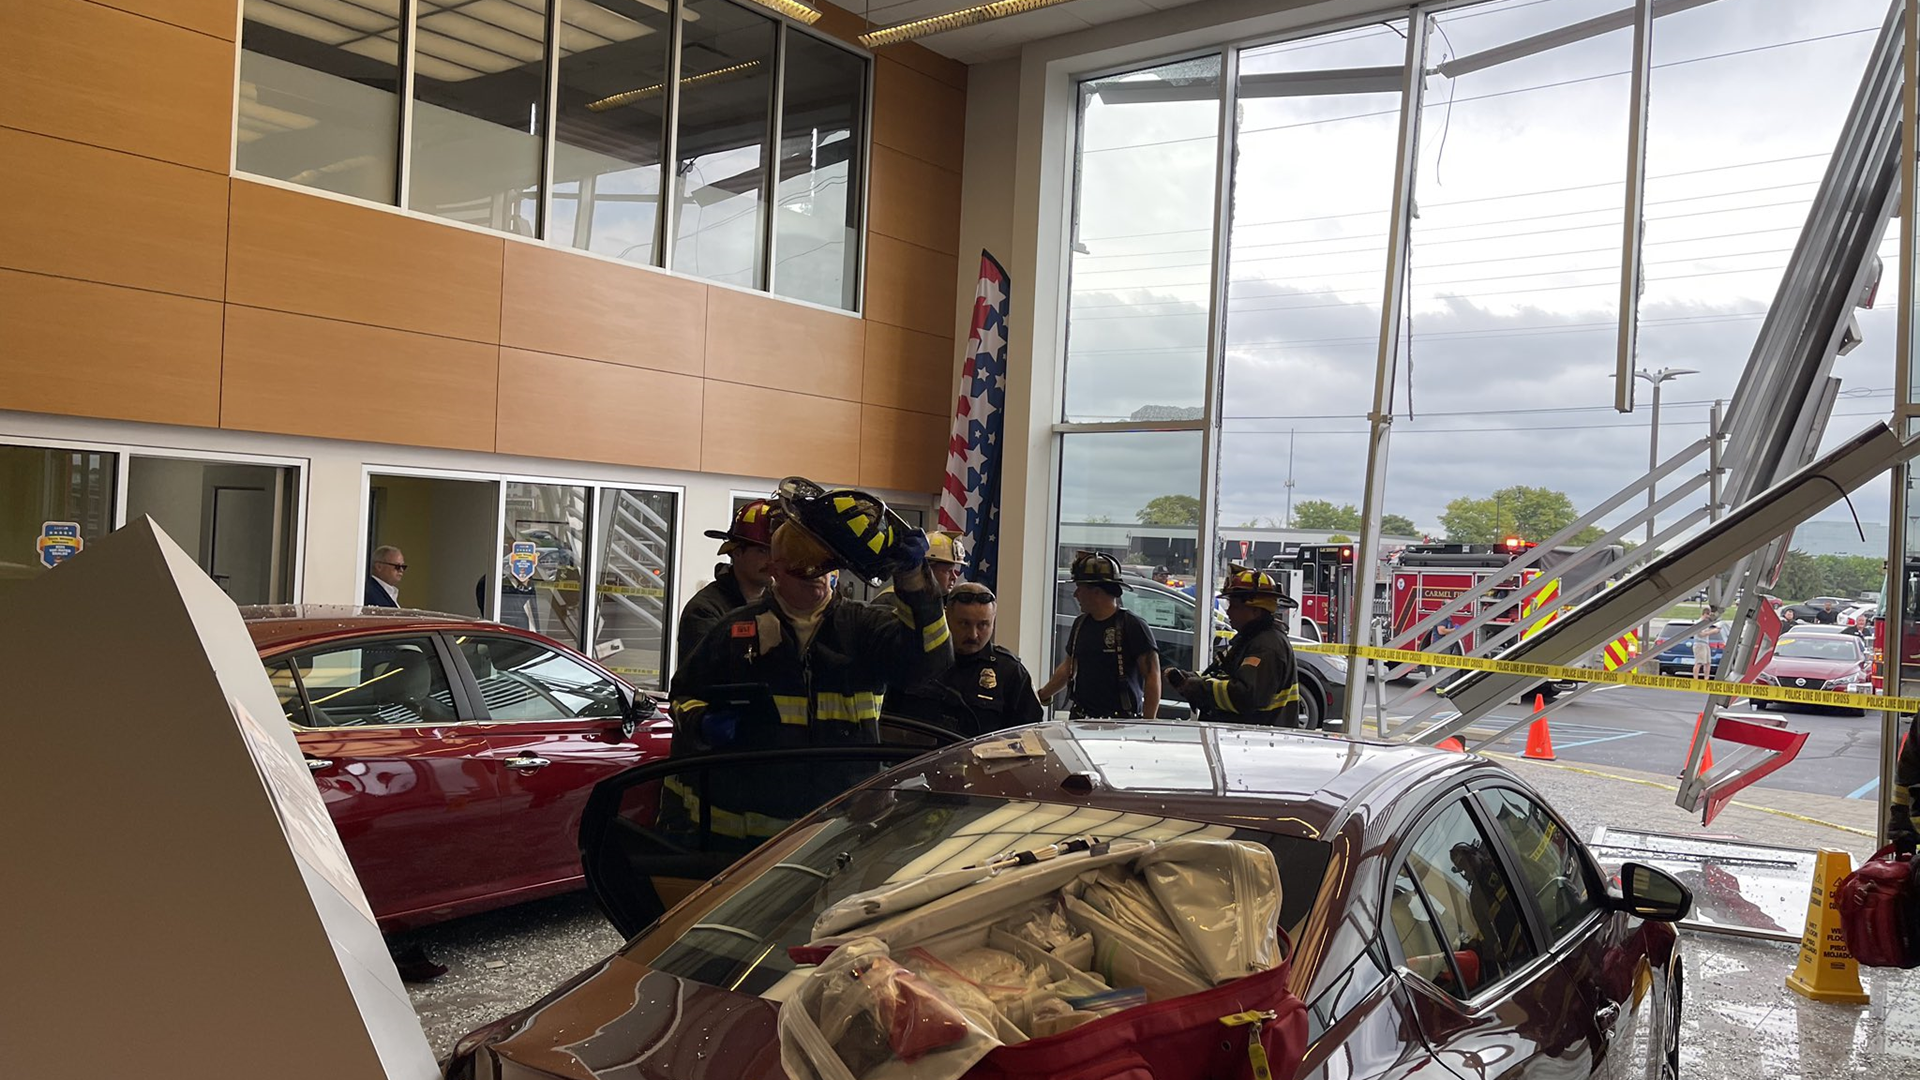 Two people were taken to the hospital after a car crashed into the Tom Wood Nissan dealership in Carmel.